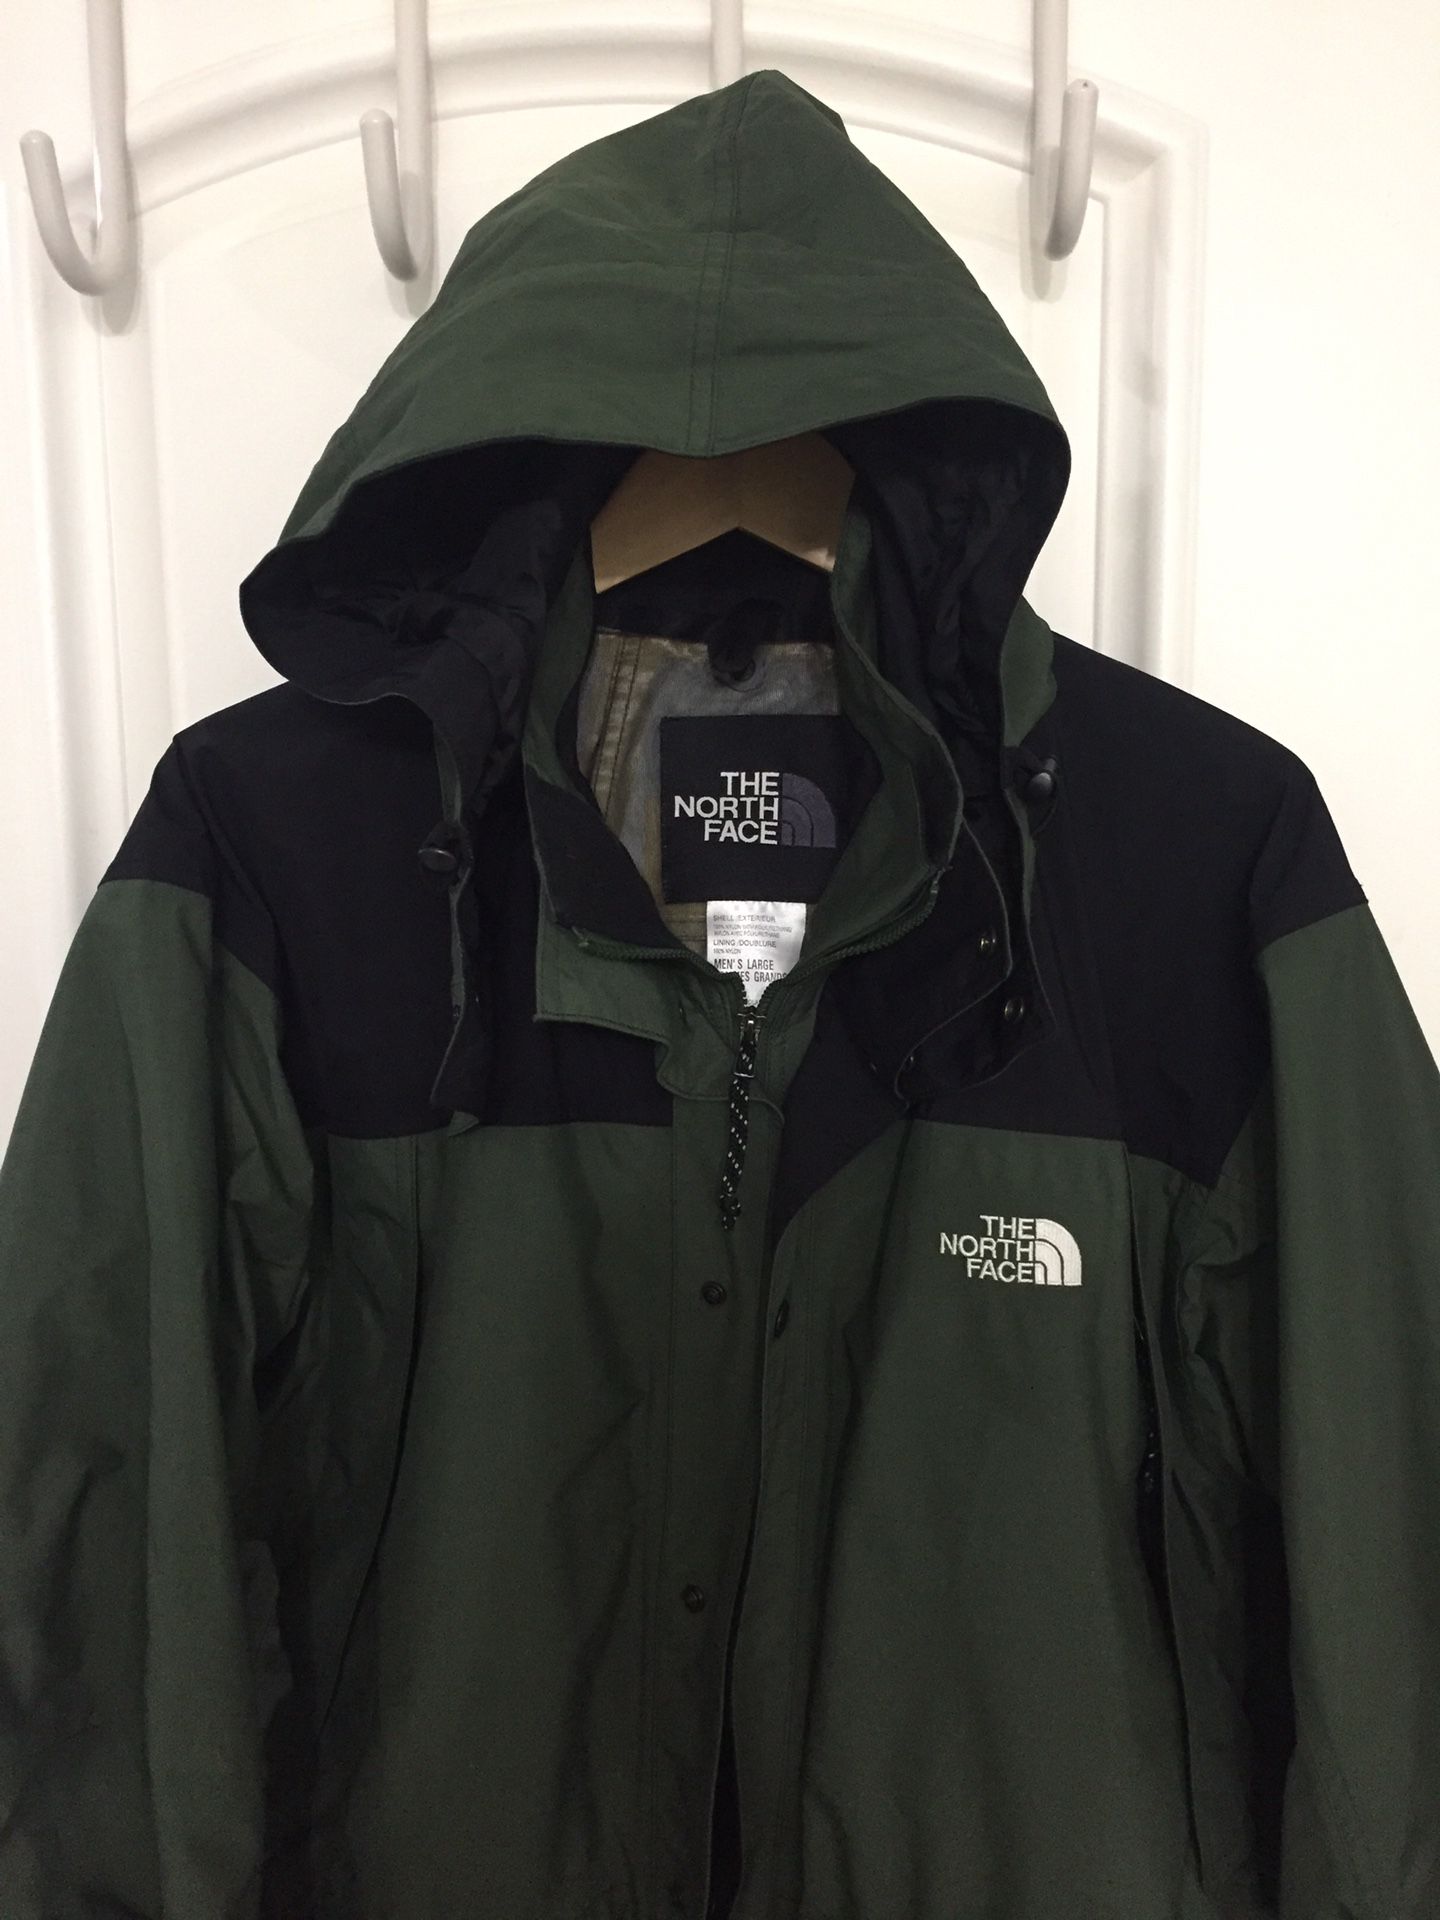 Excellent Condition - NorthFace men’s Large Rain Jacket with foldable hood